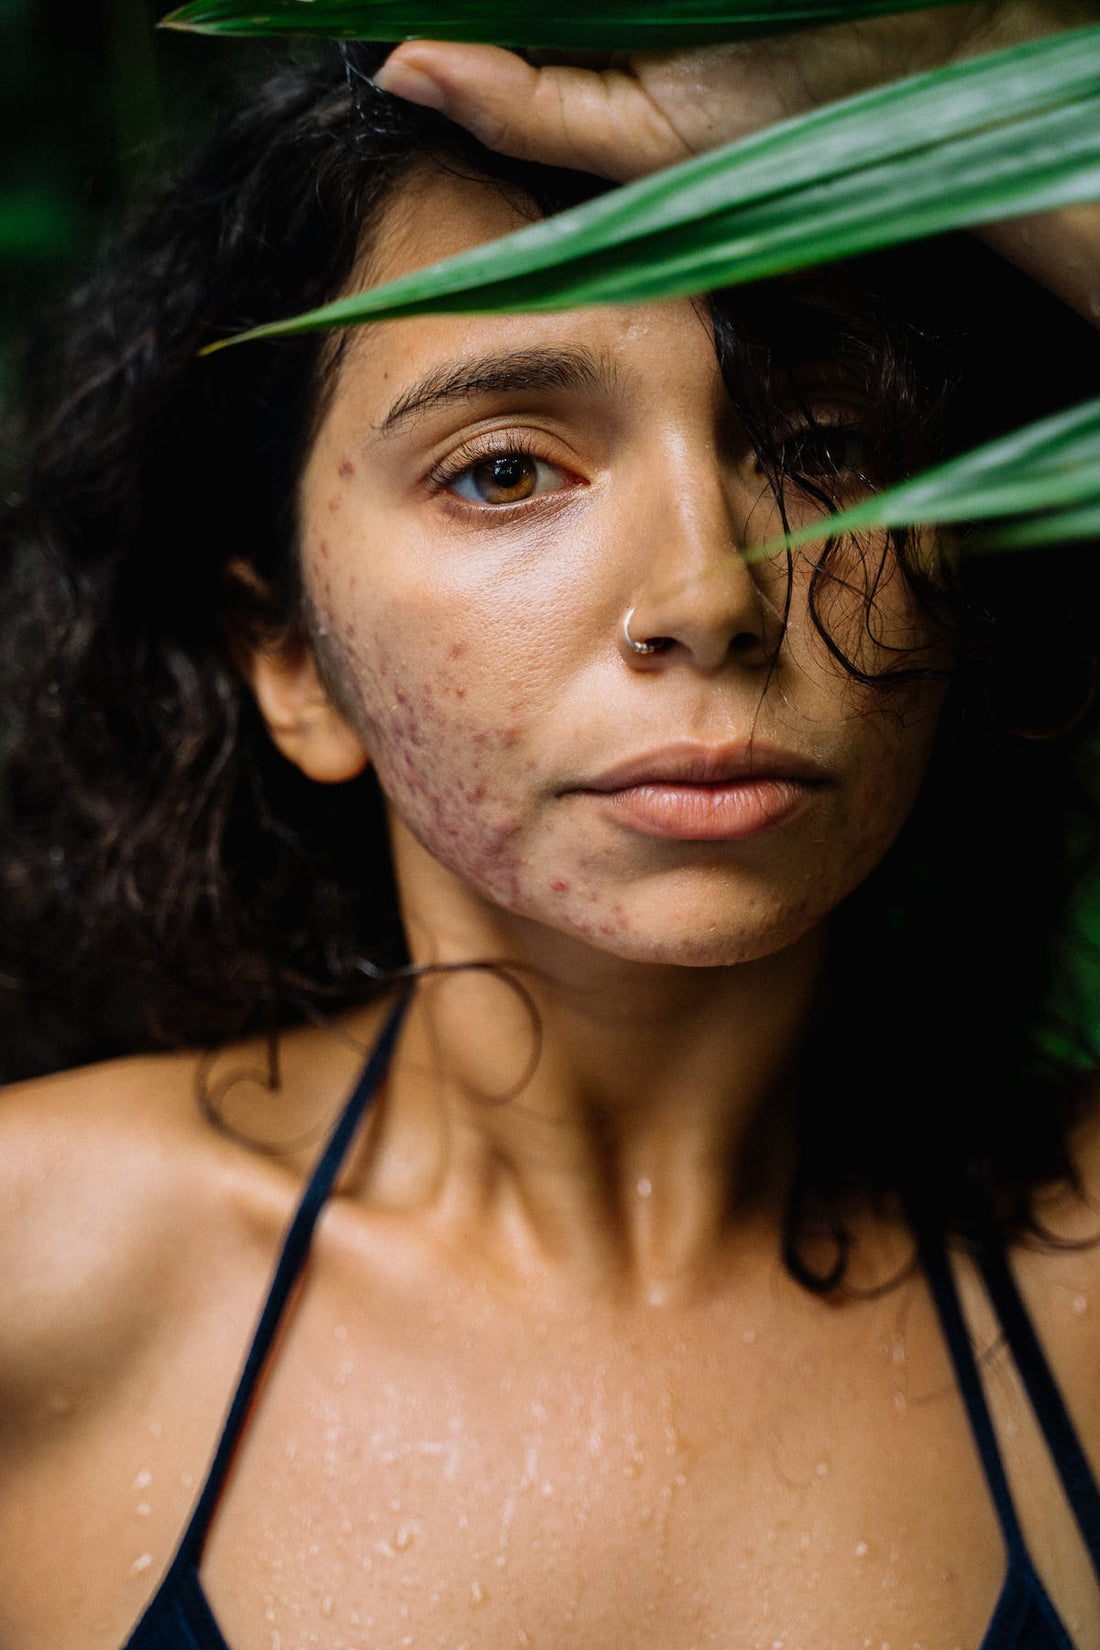 A photo of a lady with hormonal acne